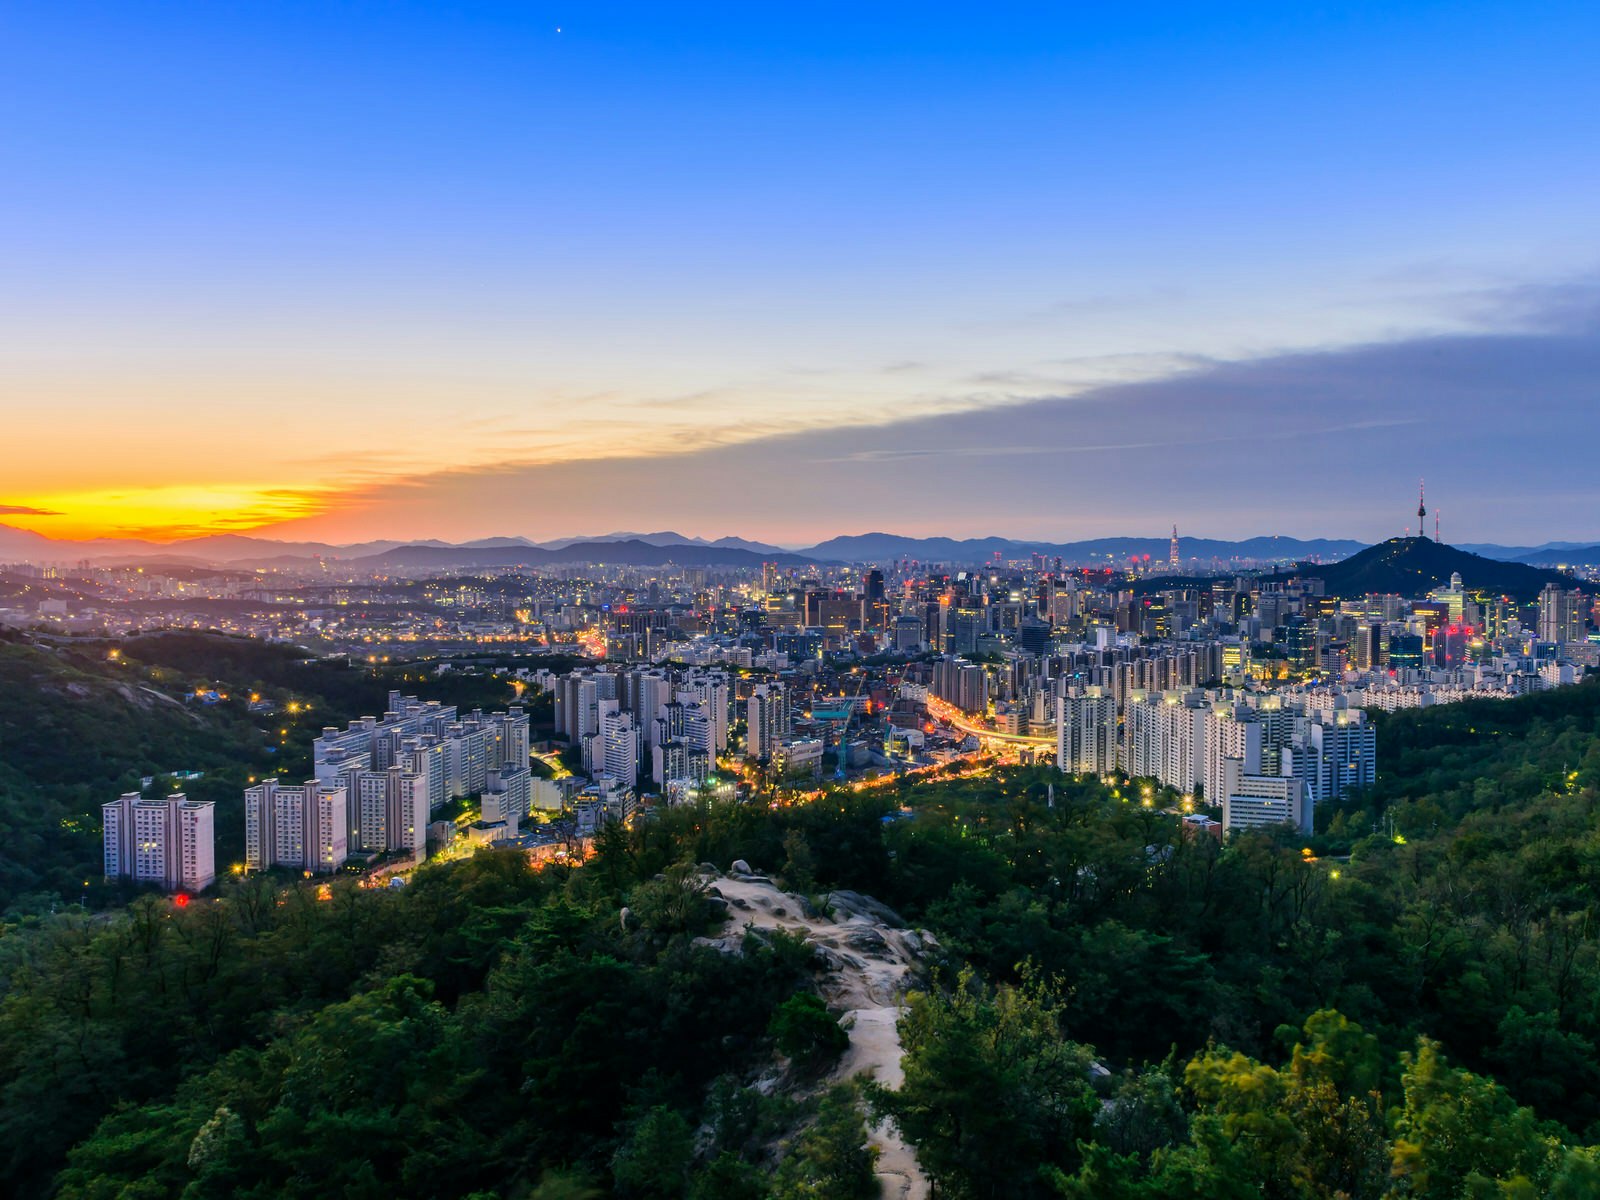 Live like a local by exploring Seoul's lesser known corners © Teerachat paibung / Shutterstock